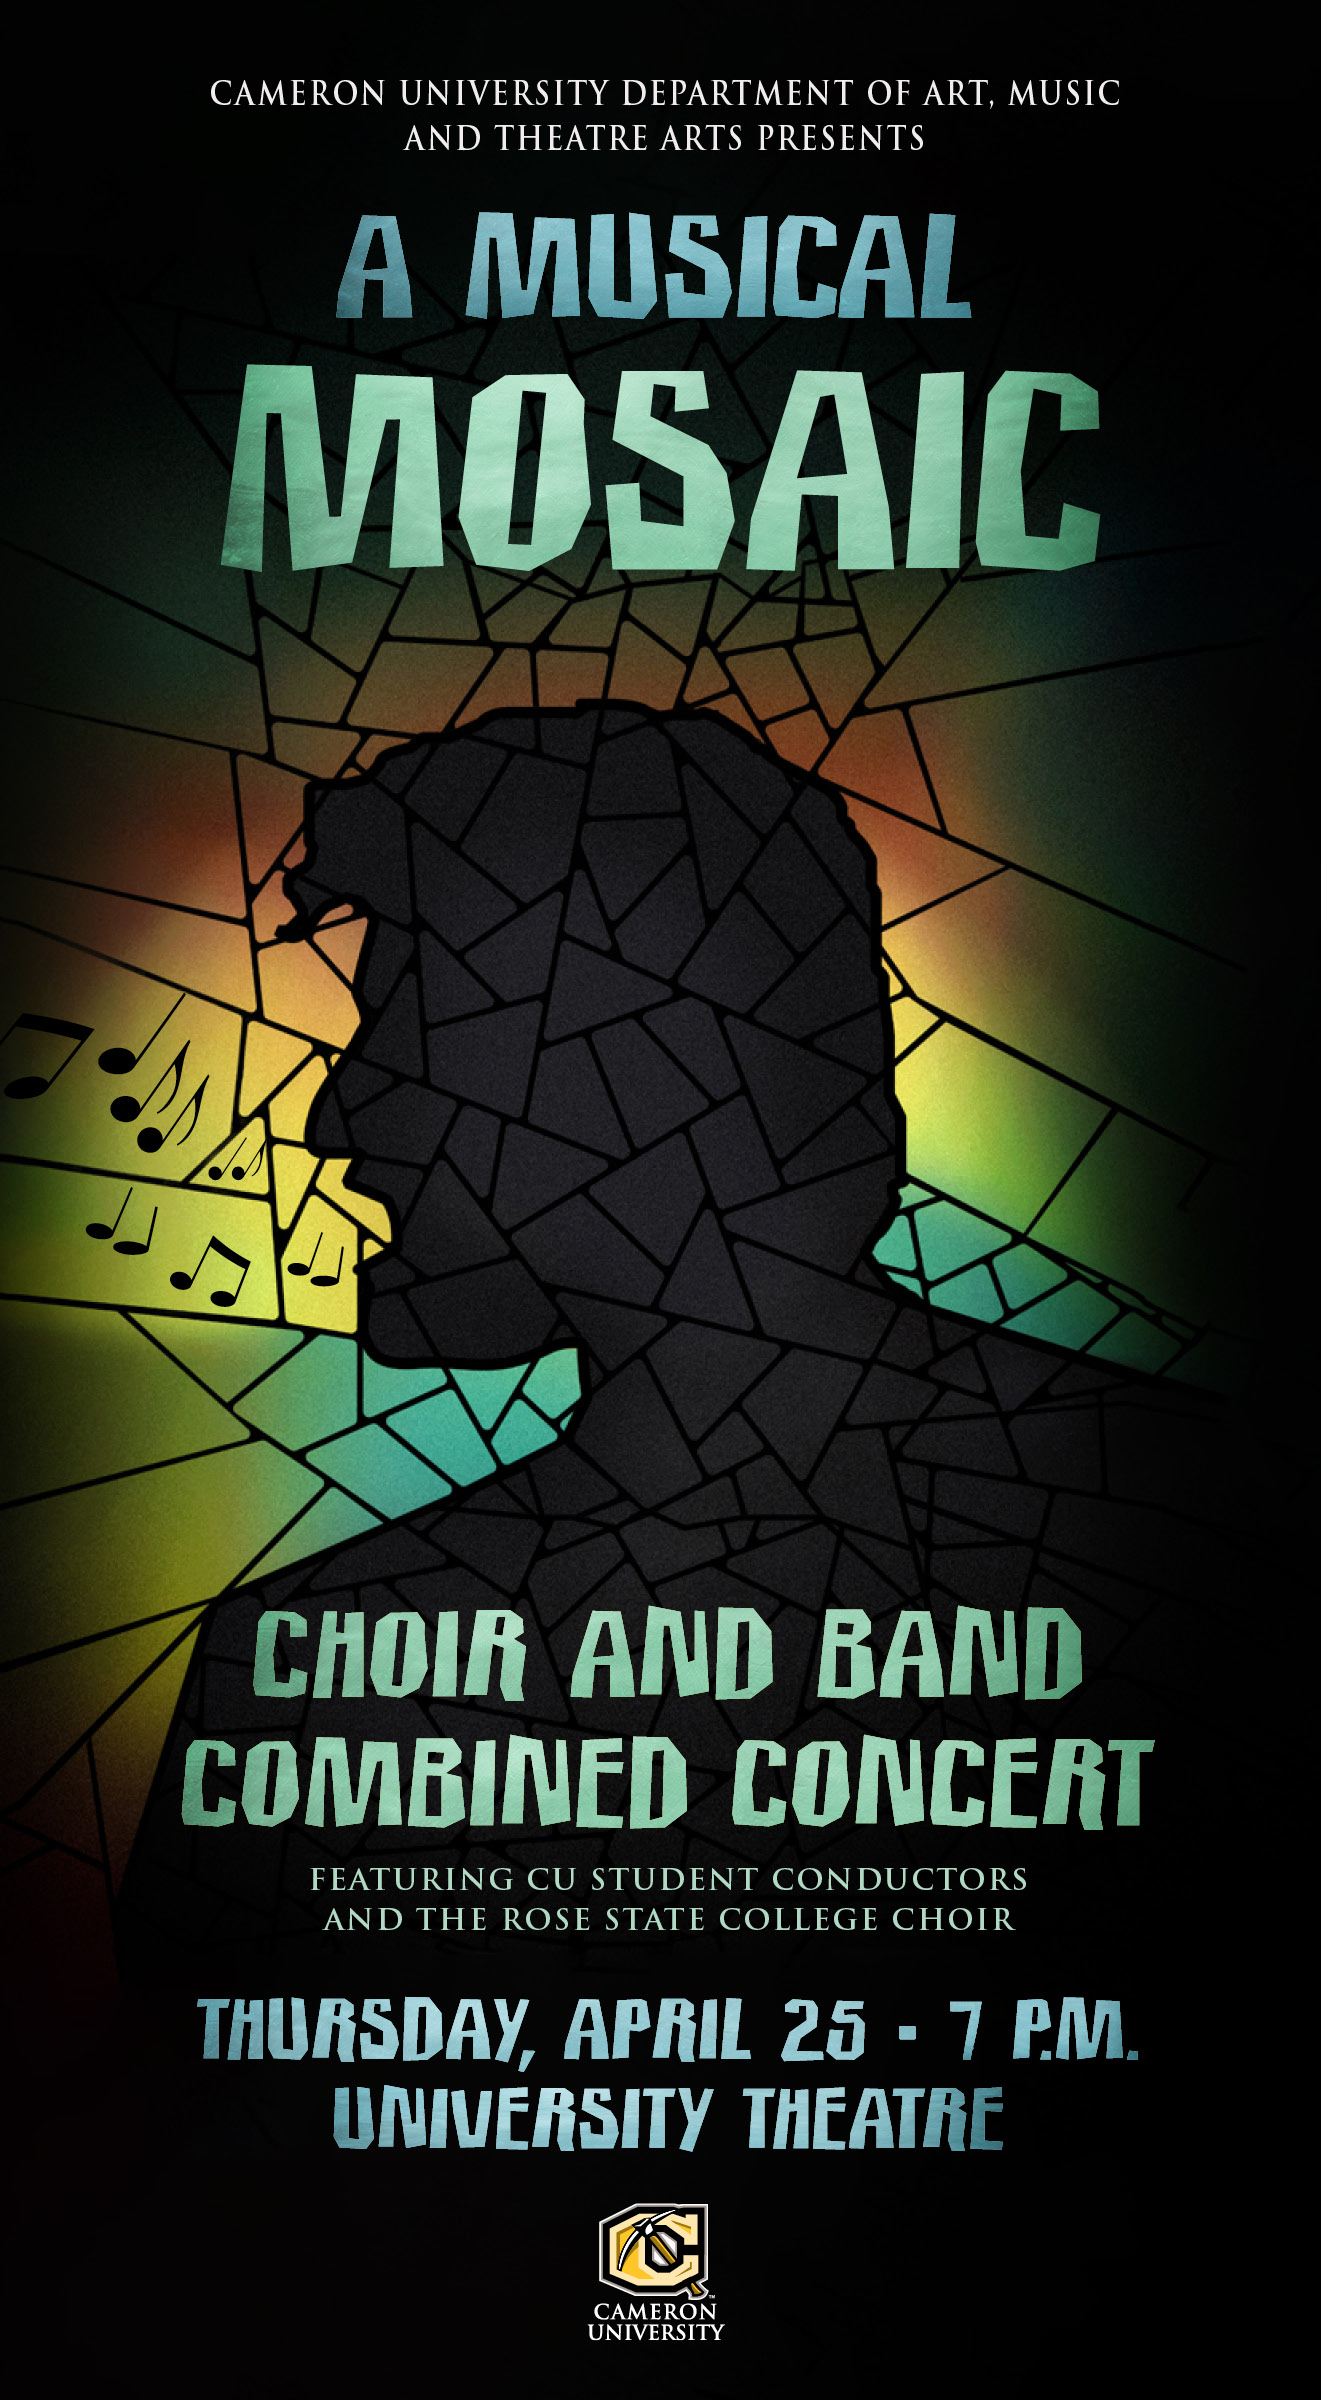 Cameron University Department of Art, Music and Theatre Arts presents
A Musical Mosaic
Choir and Band Combined Concert
Featuring CU Student Conductors and the Rose State Choir
Thursday April 25 7 p.m.
University Theatre